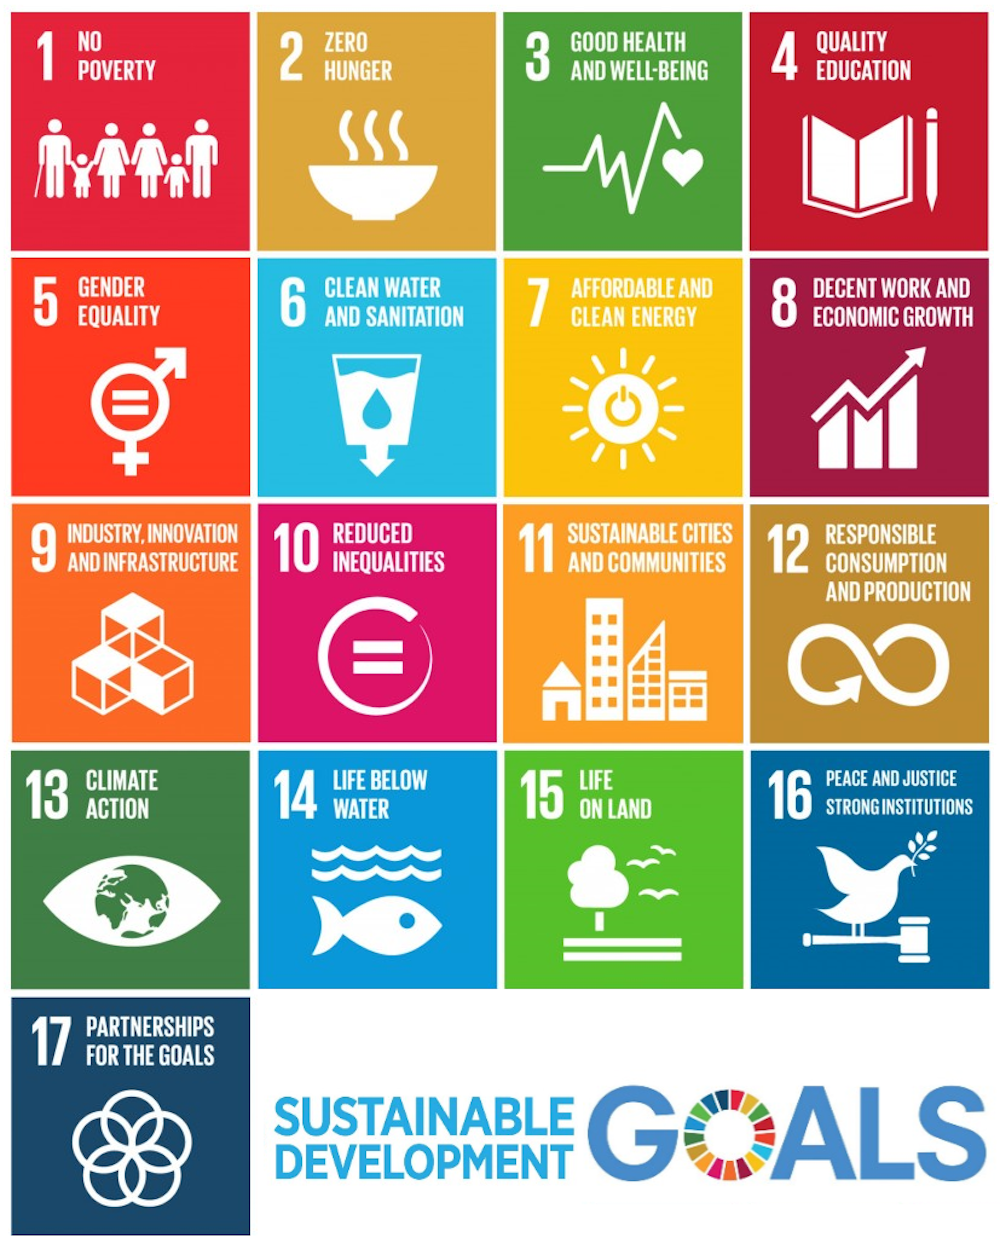 Furthering the UN's Sustainable Development Goals: Public and